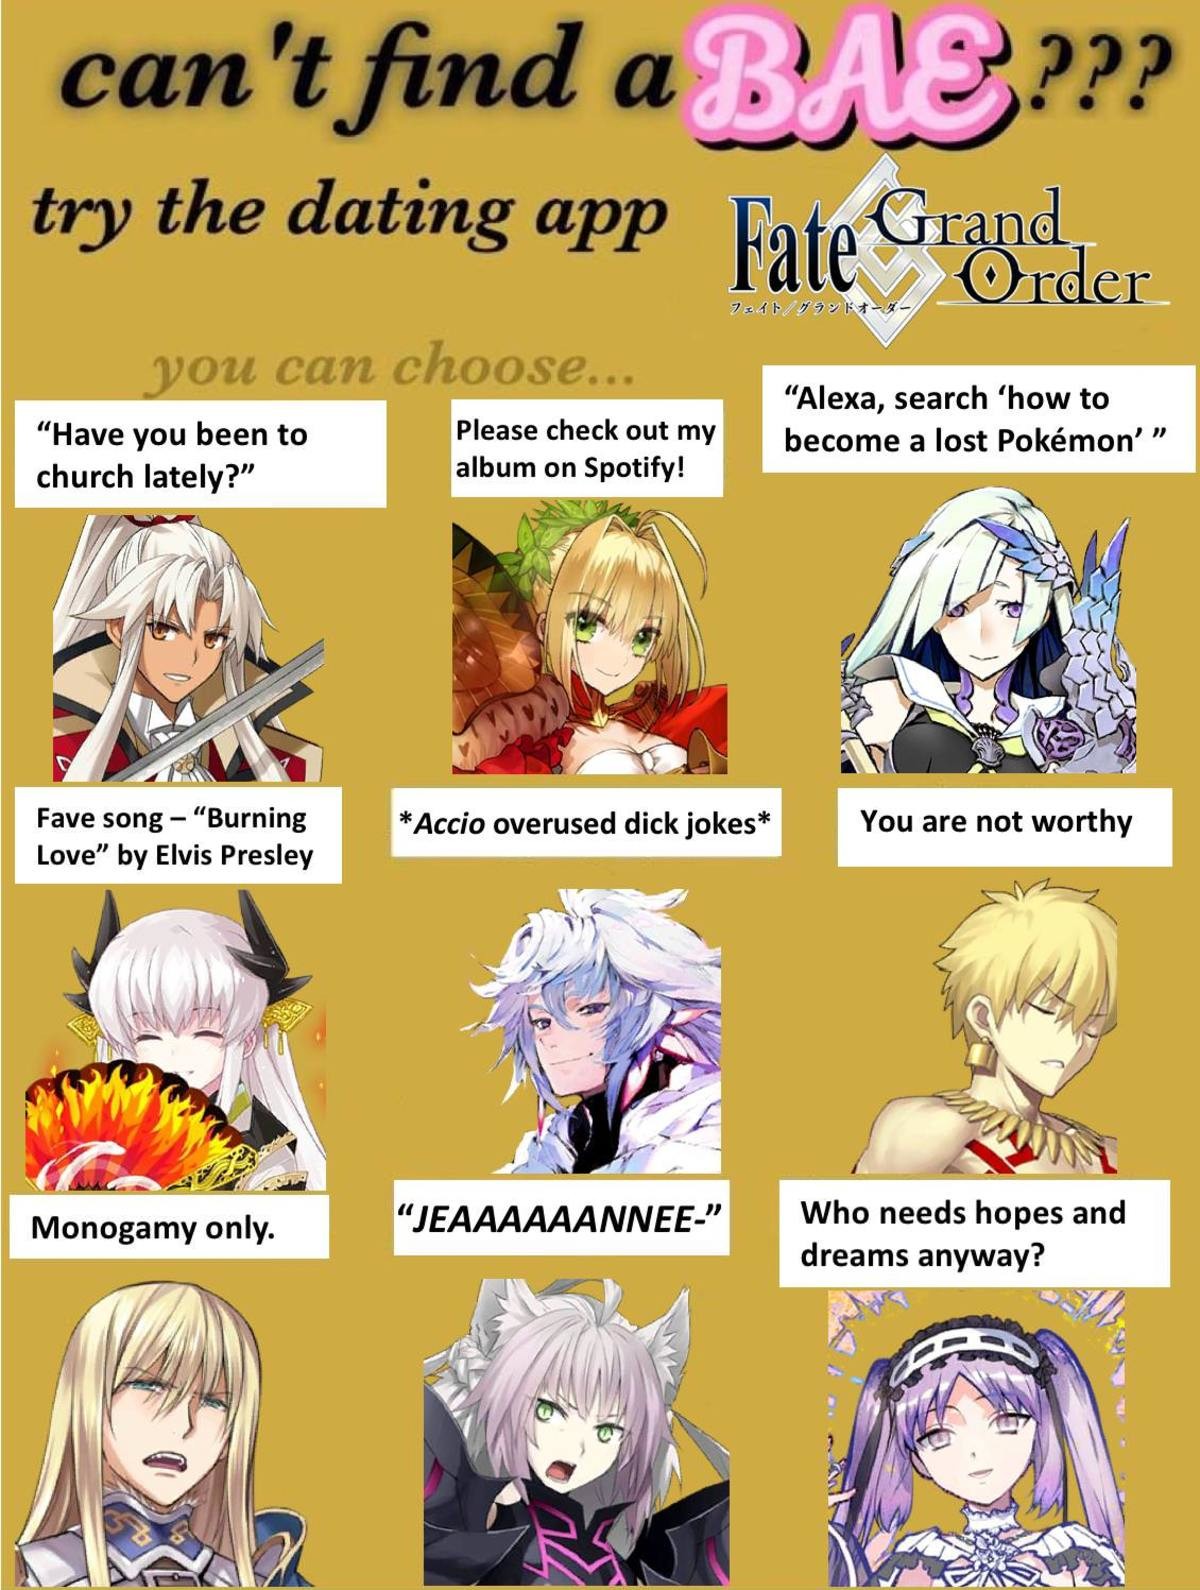 This fate dating app